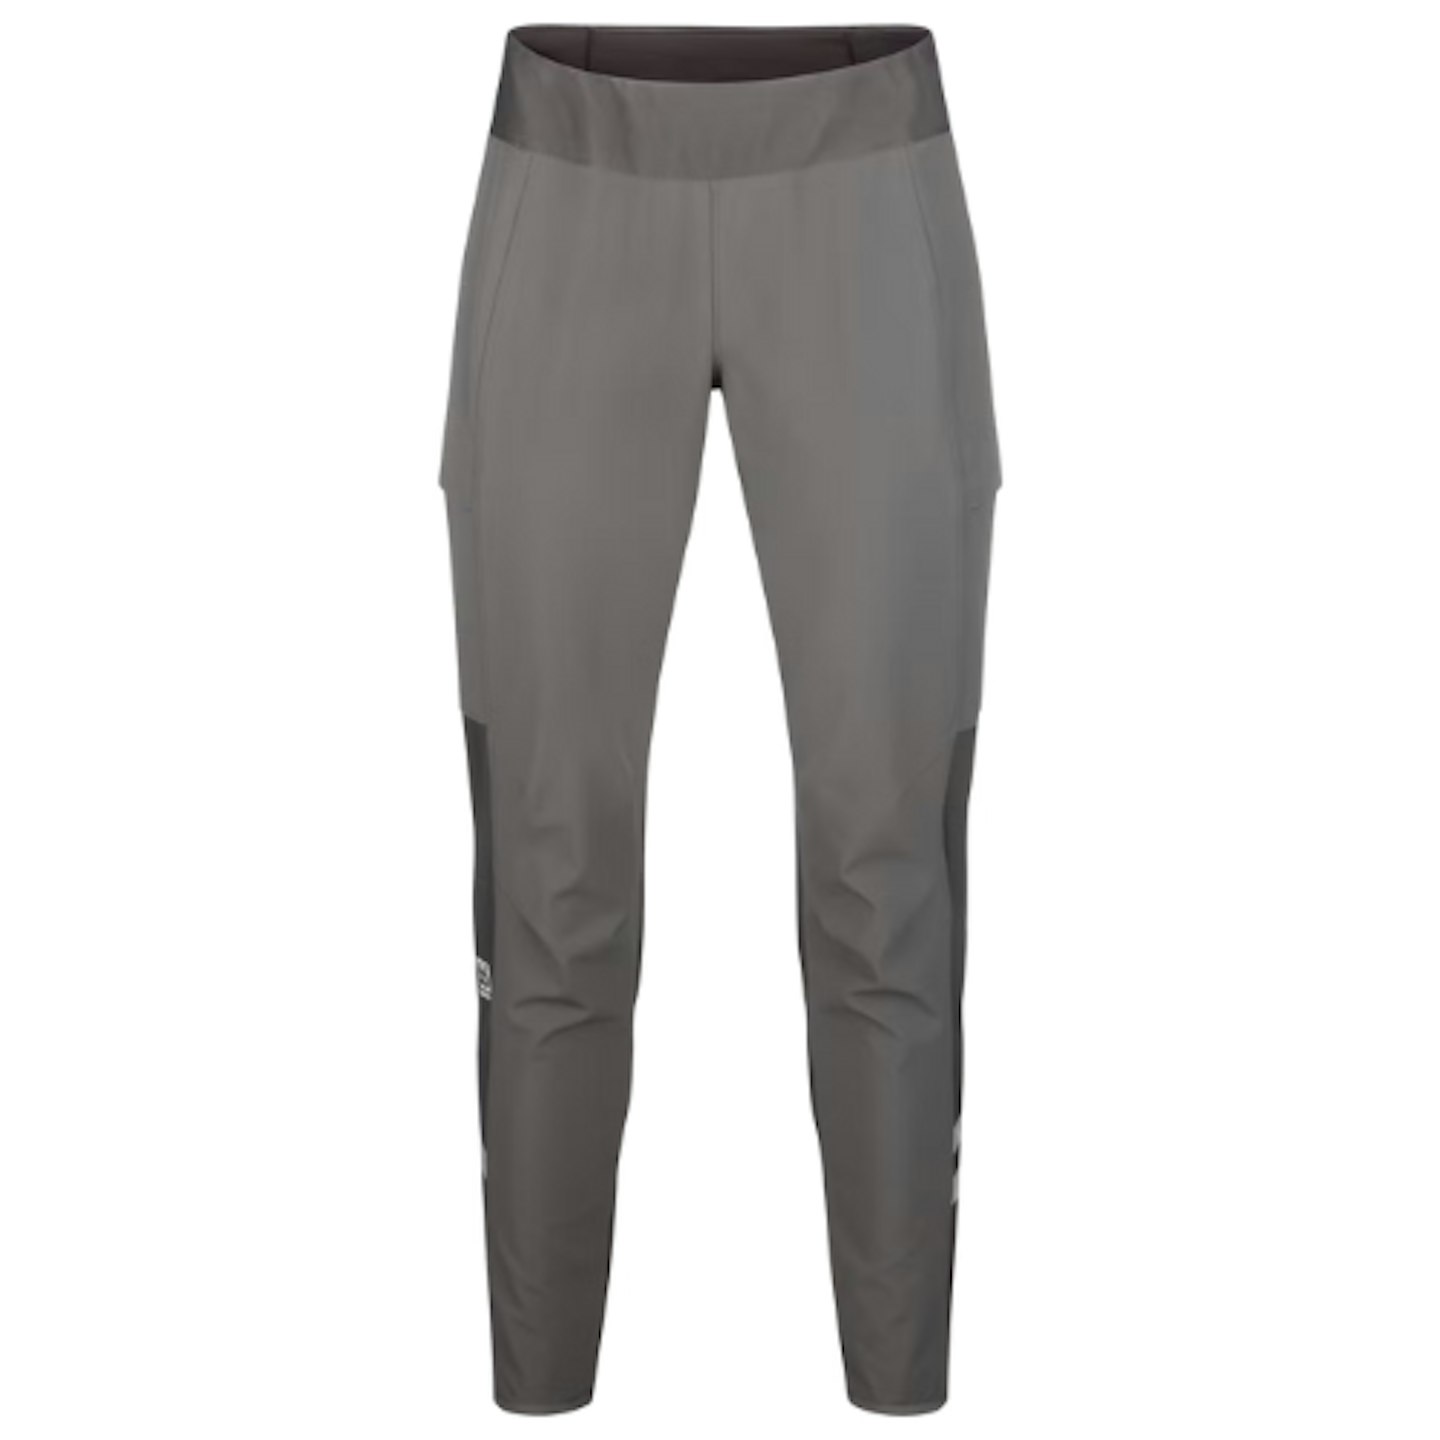 66°North Straumnes Trousers Women's